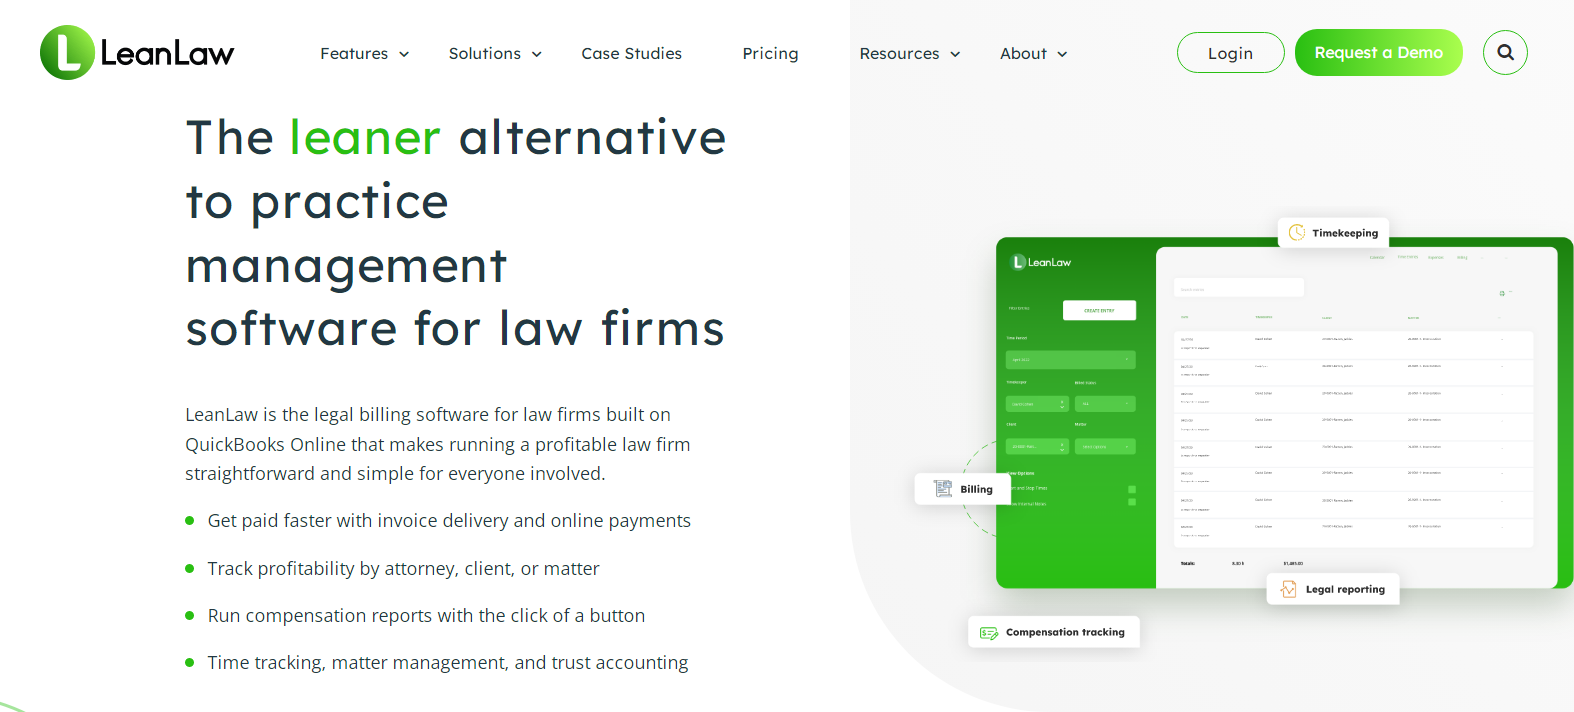 LeanLaw Secures $4 Million in Series A Funding from FINTOP Capital.